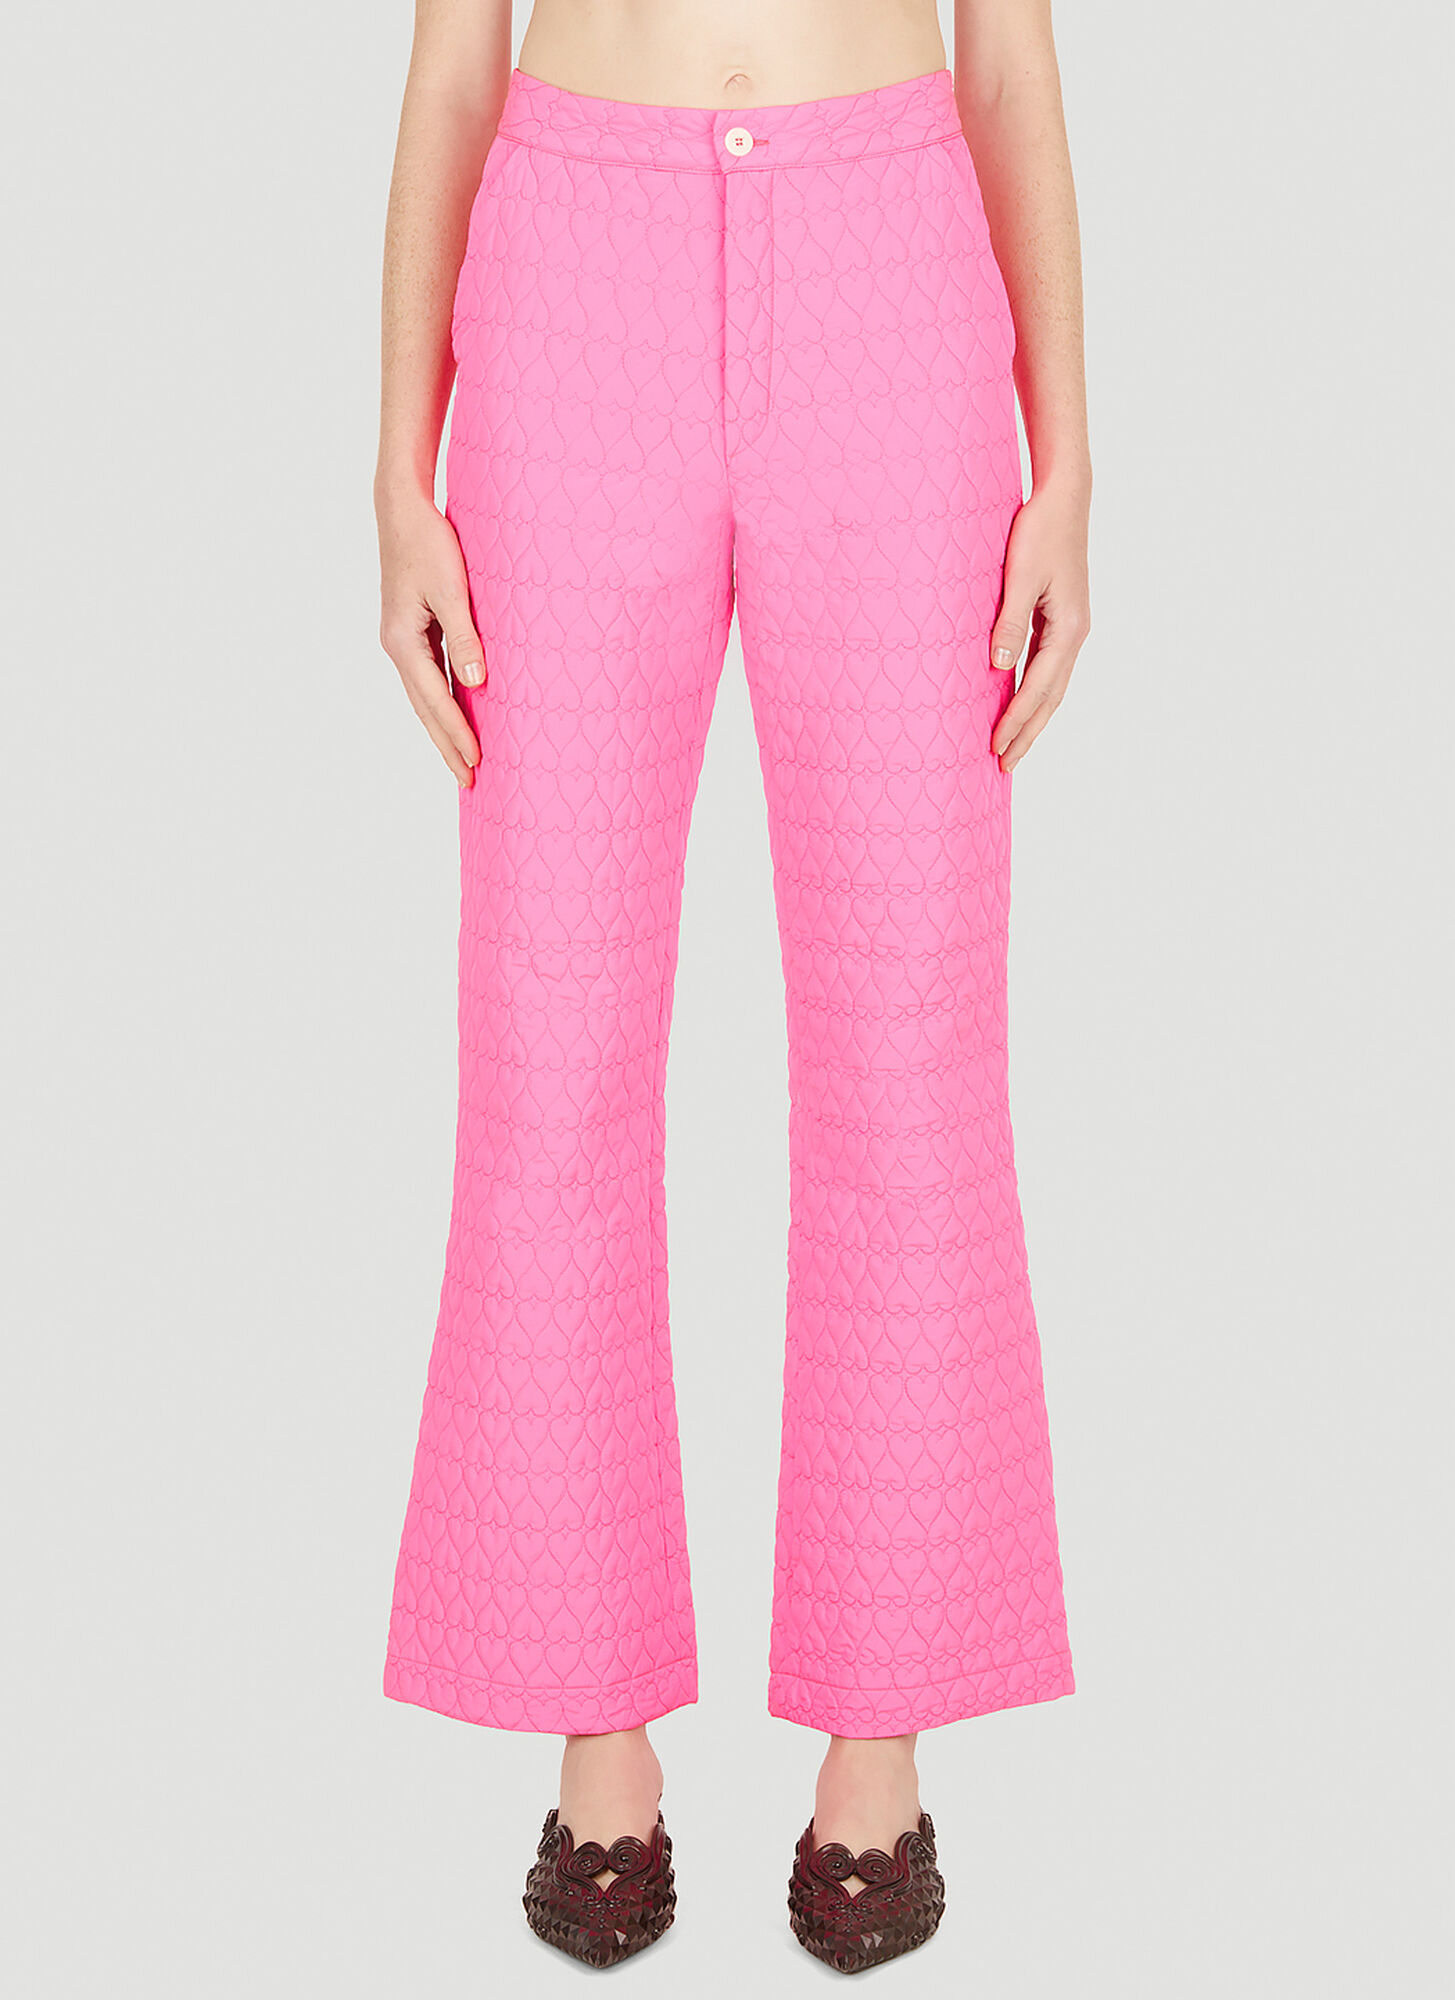 MARCO RAMBALDI QUILTED HEART PANTS